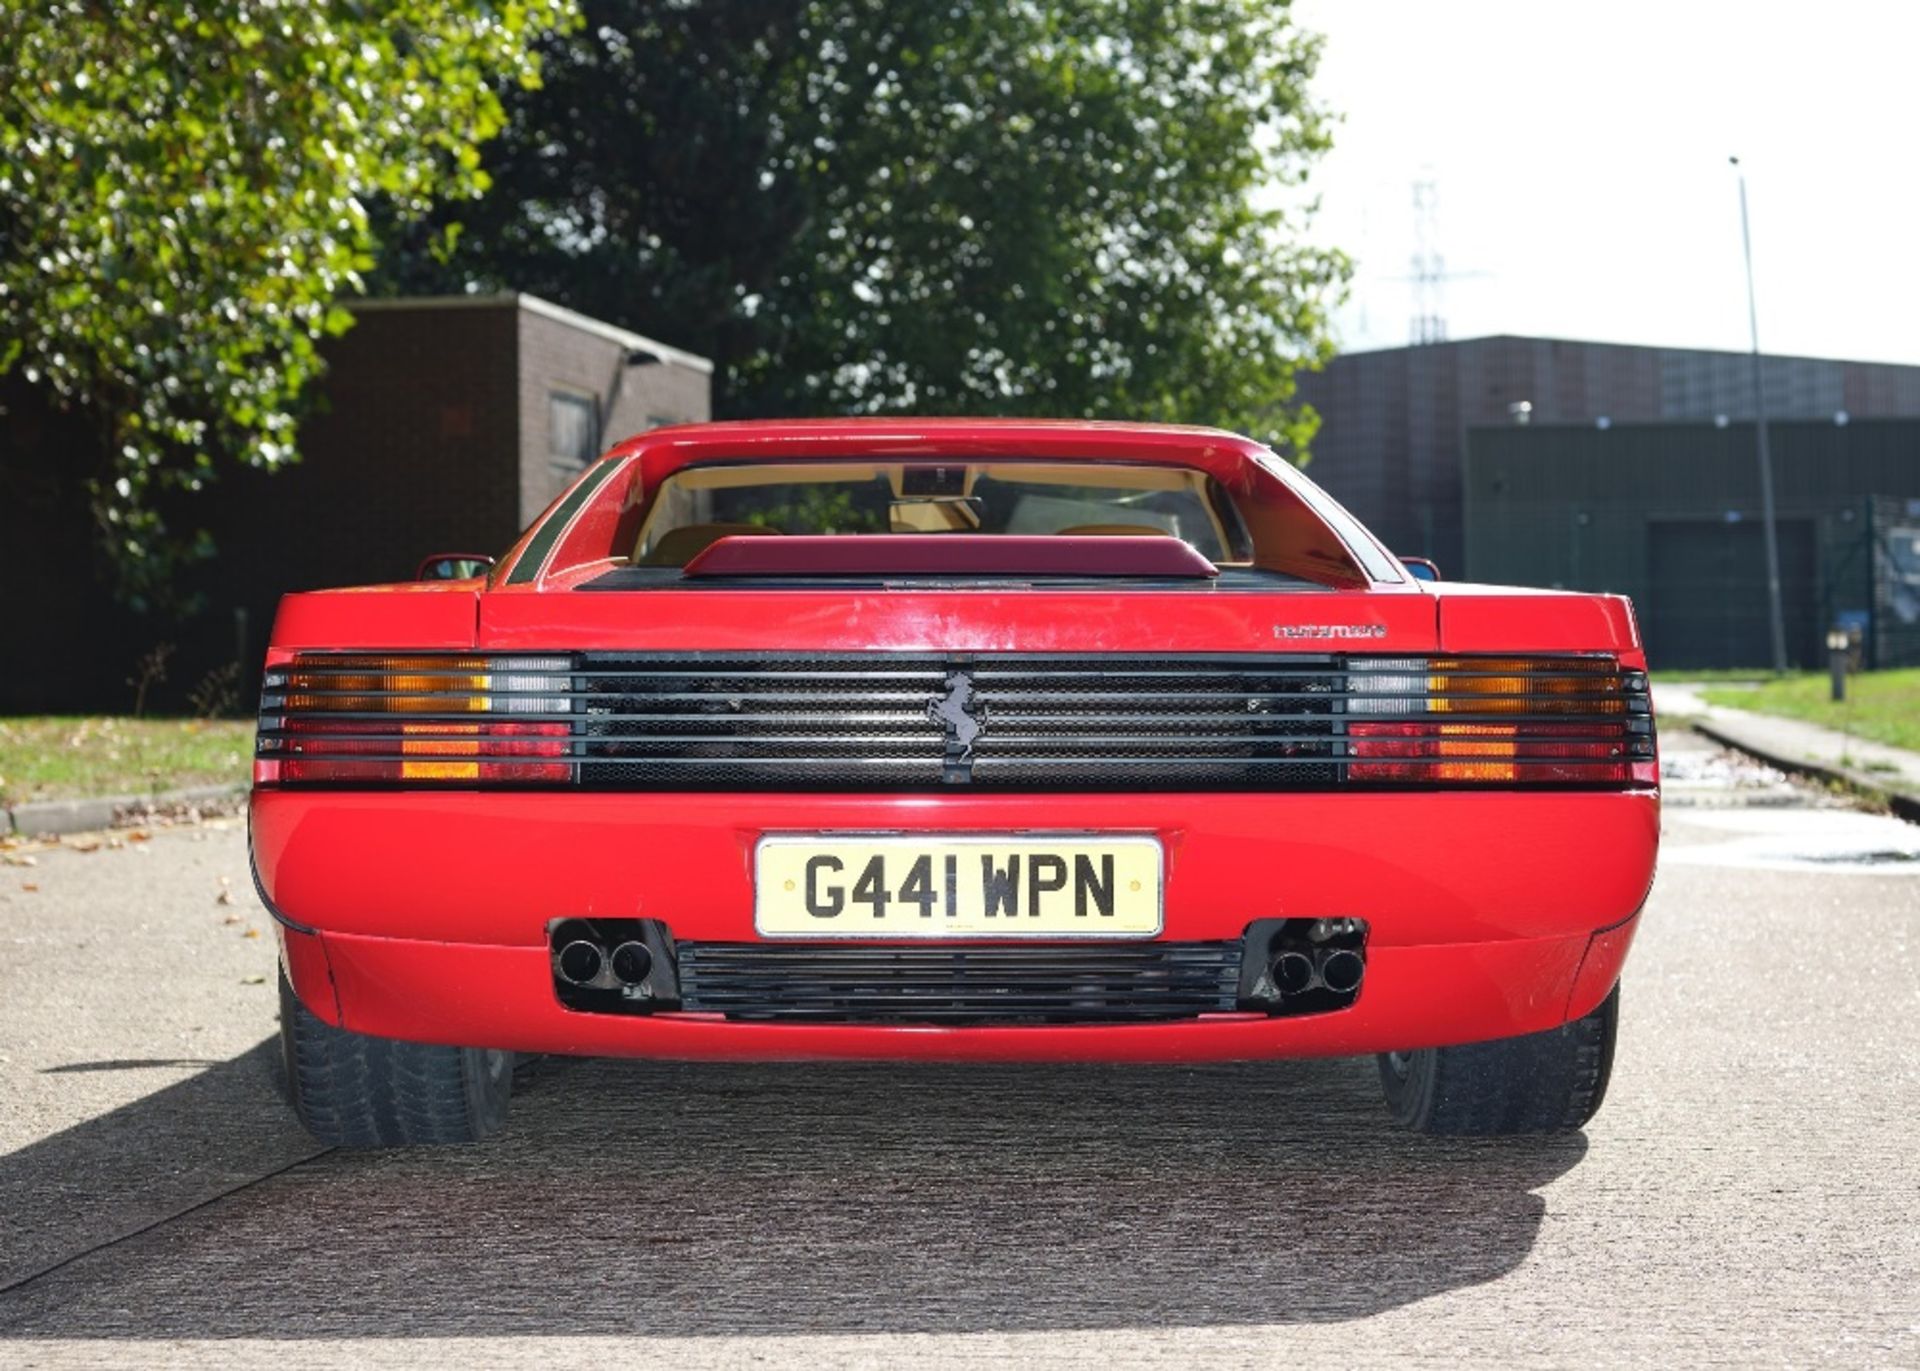 1989 FERRARI TESTAROSSA Registration Number: G441 WPN Chassis Number: ZFFAA17C000082817 Recorded - Image 6 of 59